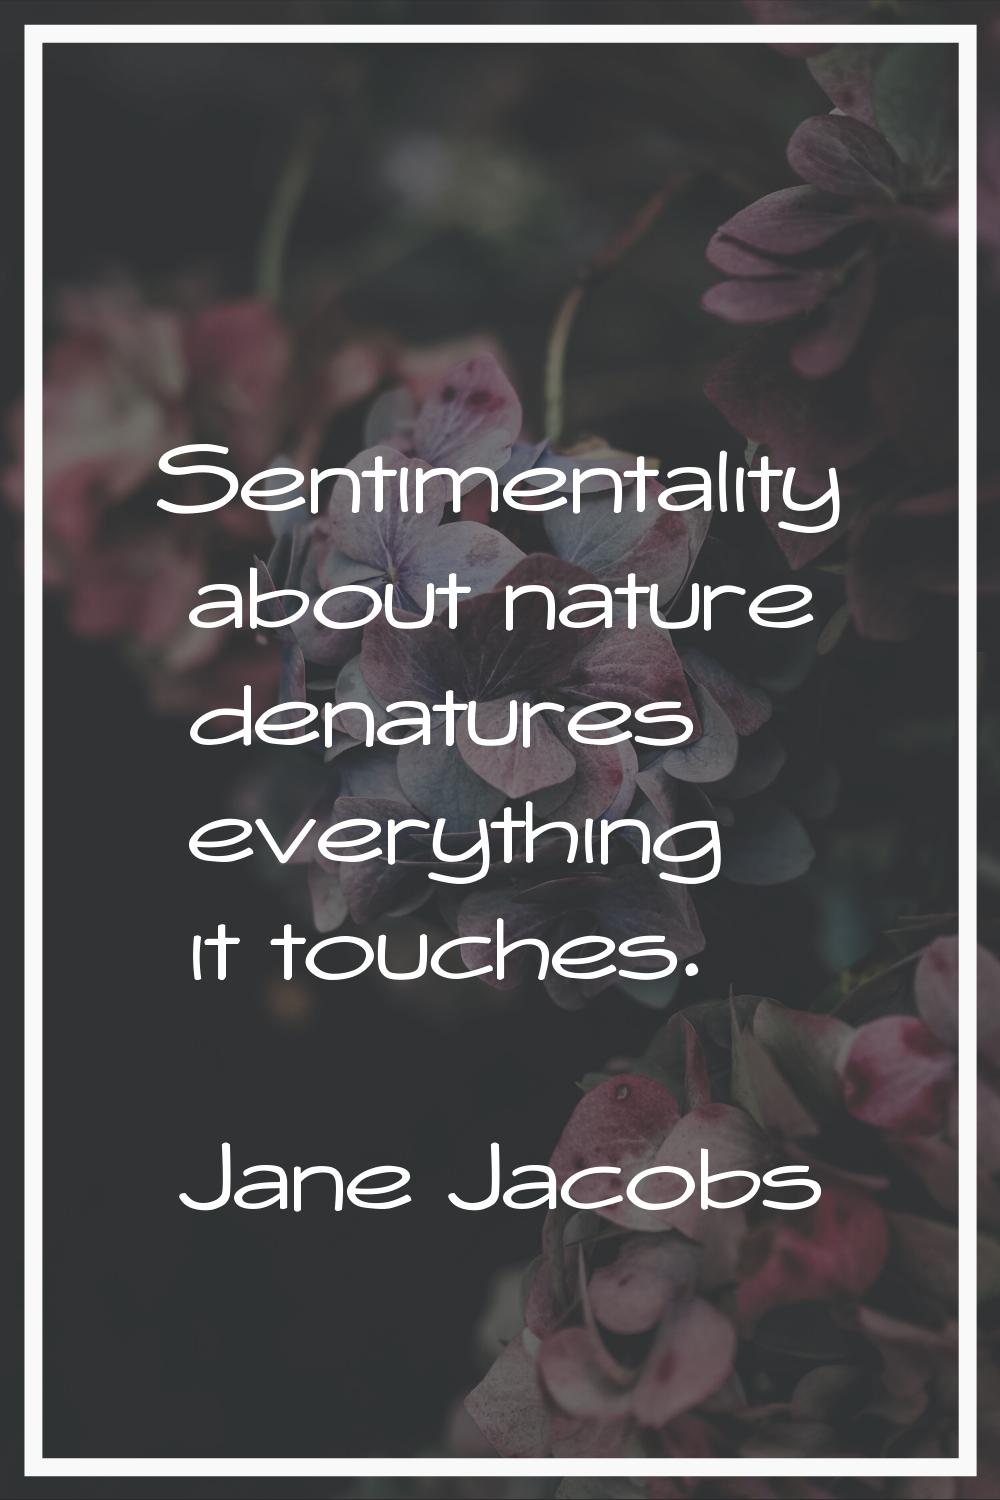 Sentimentality about nature denatures everything it touches.